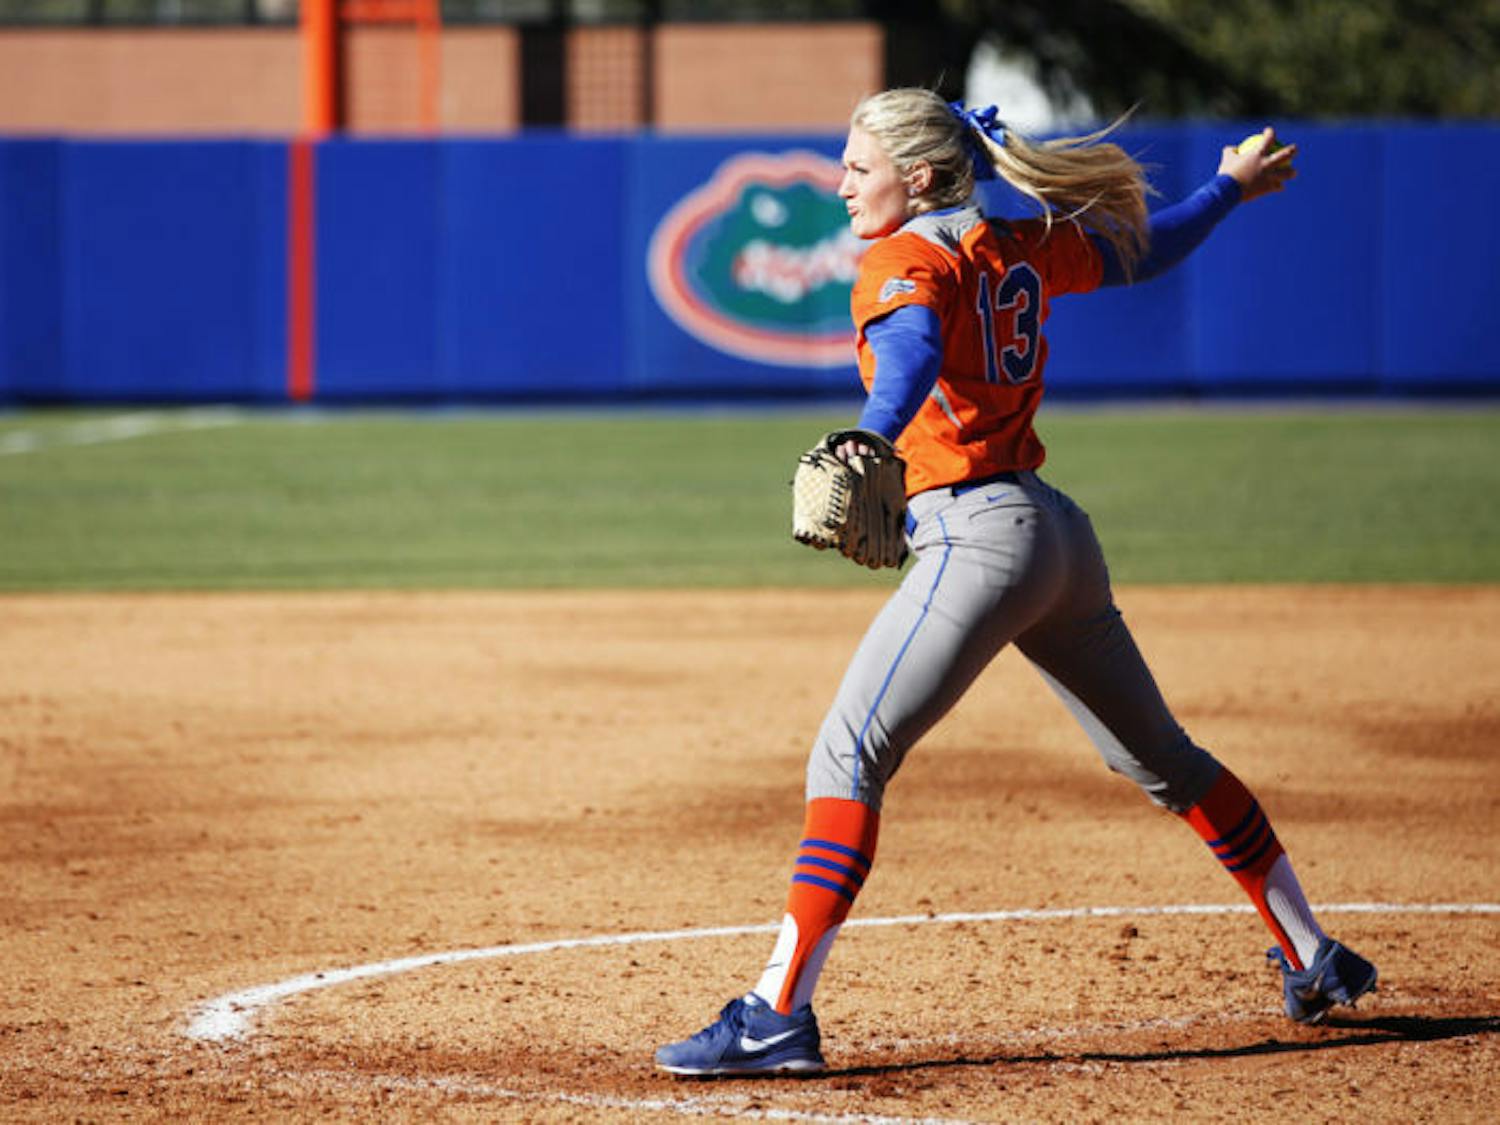 Junior starter Hannah Rogers pitches during Florida’s 9-1 victory against UNC Wilmington on Feb. 17 at Katie Seashole Pressly Stadium. Rogers gave up five runs to Mississippi State in the second inning on Sunday.
